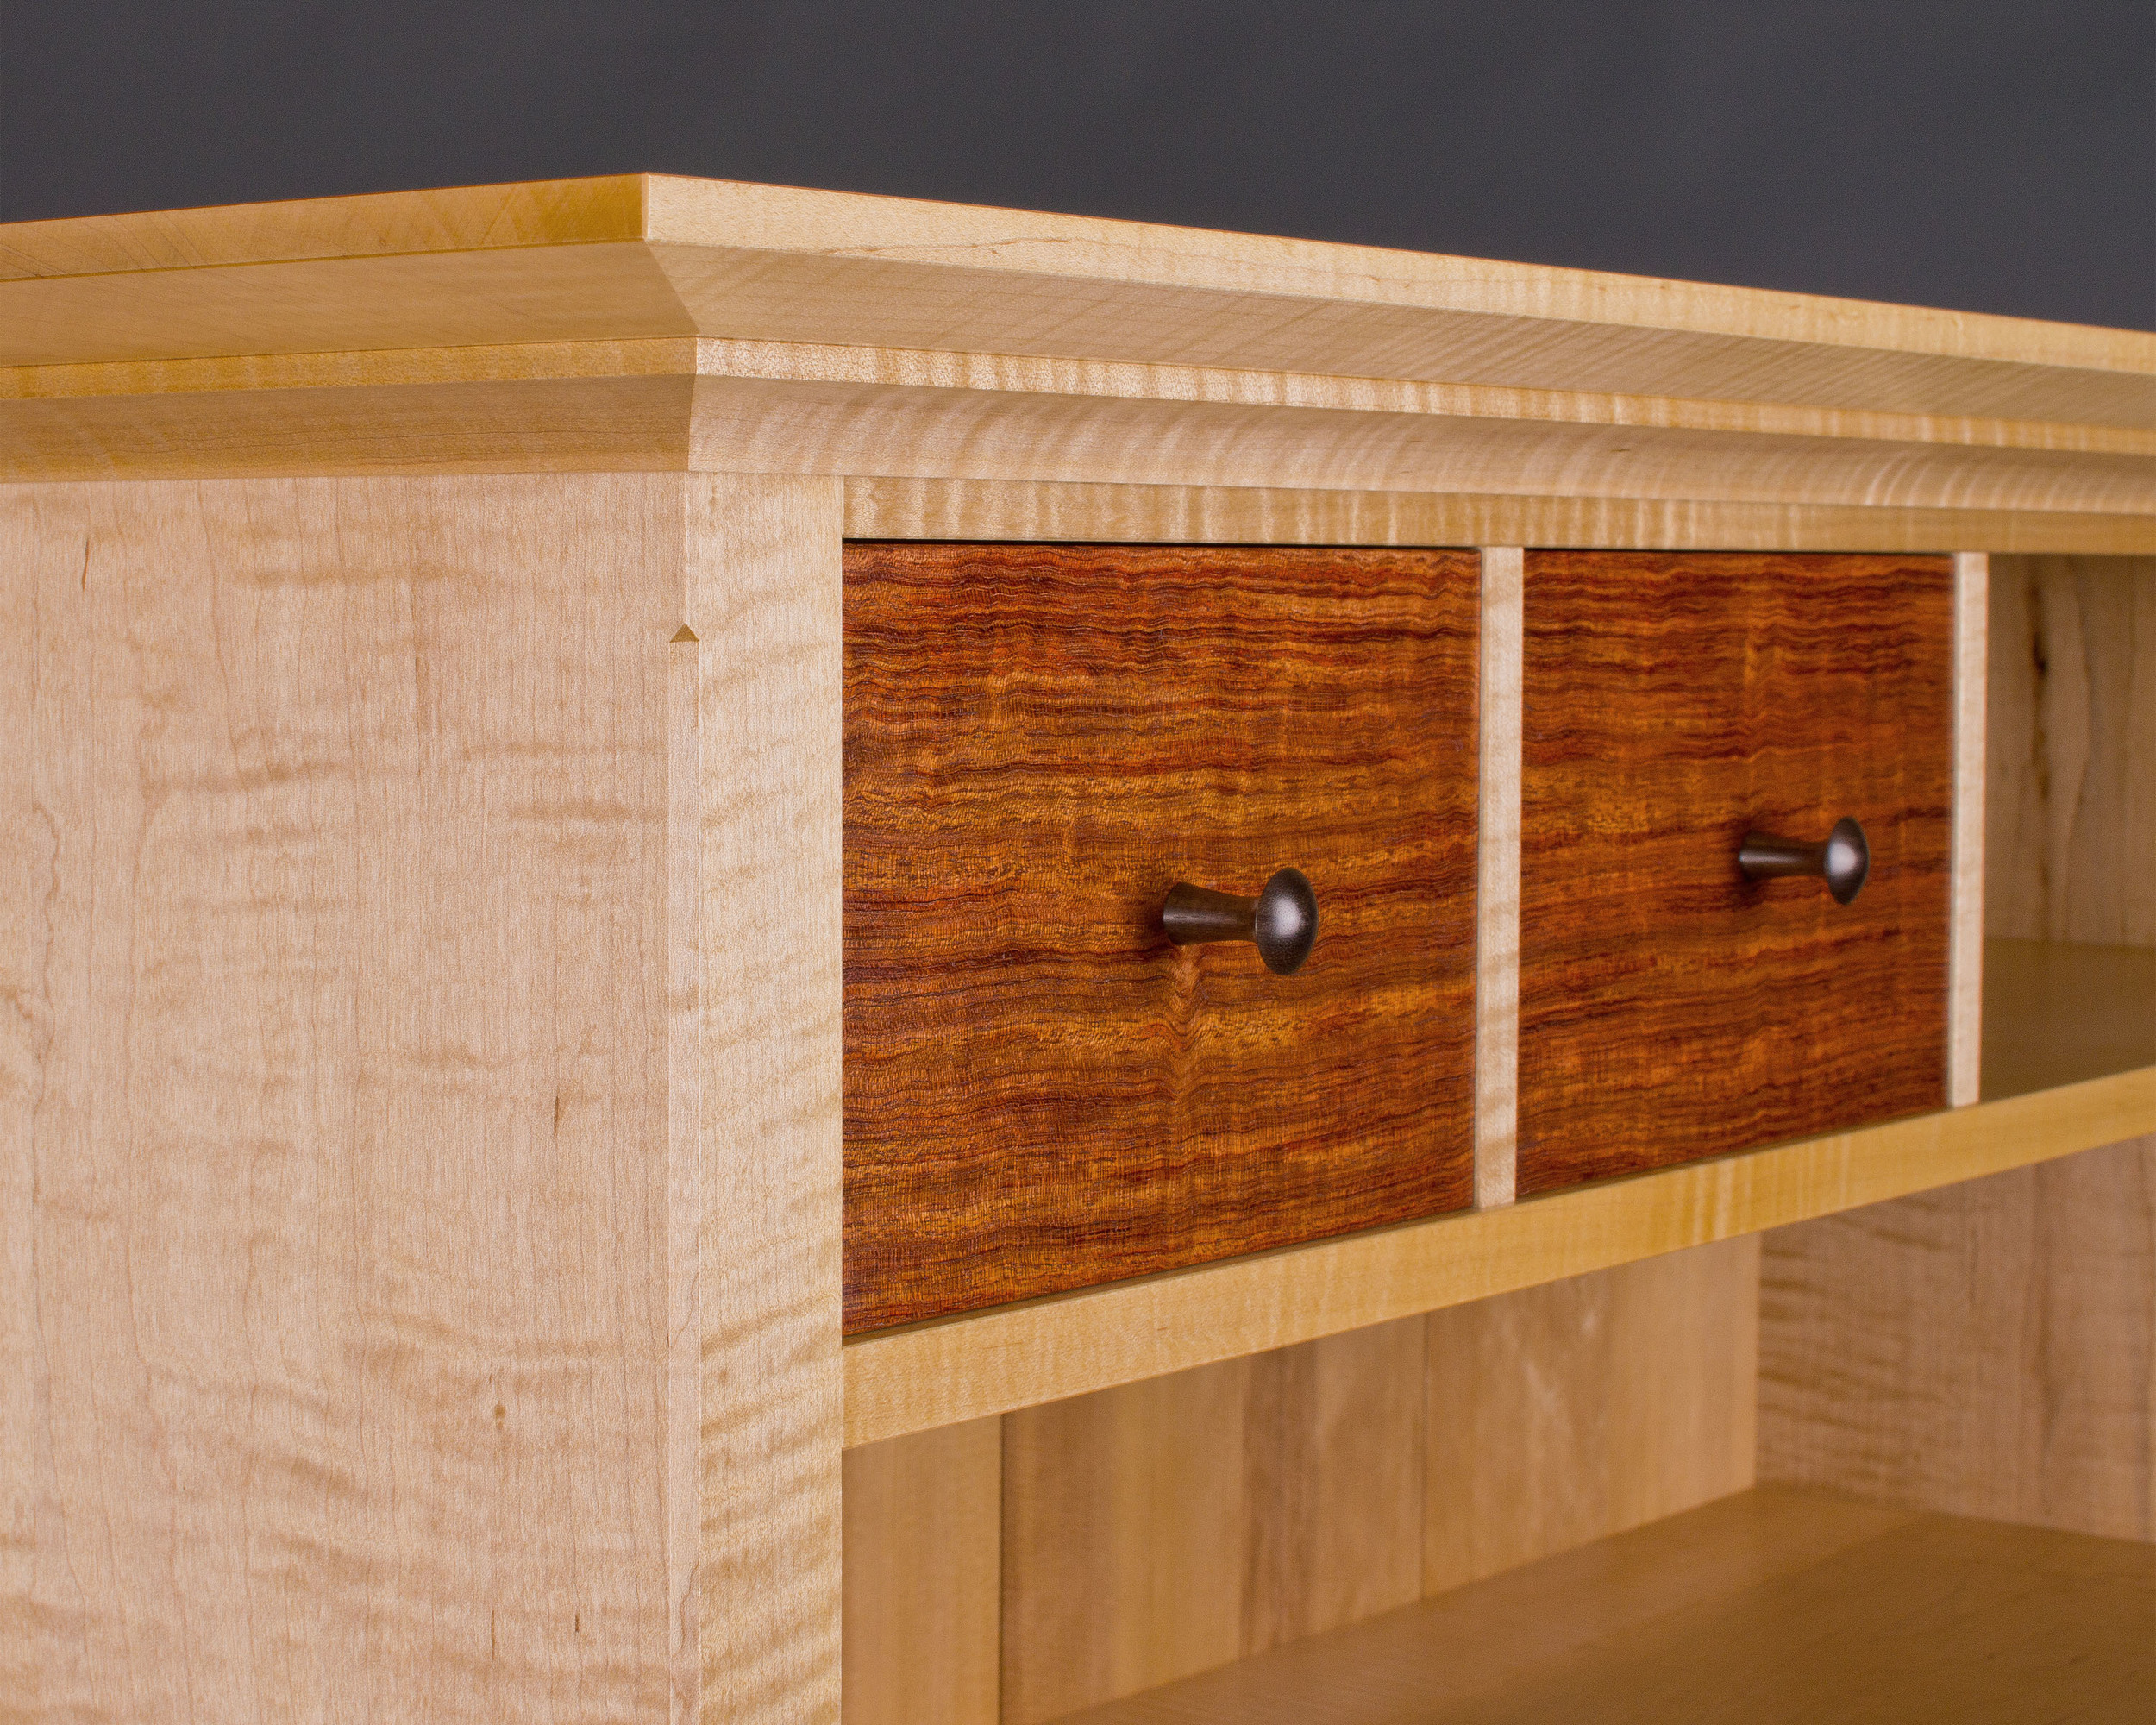 off-center drawer fronts are made of bubinga, with hand-turned rosewood knobs